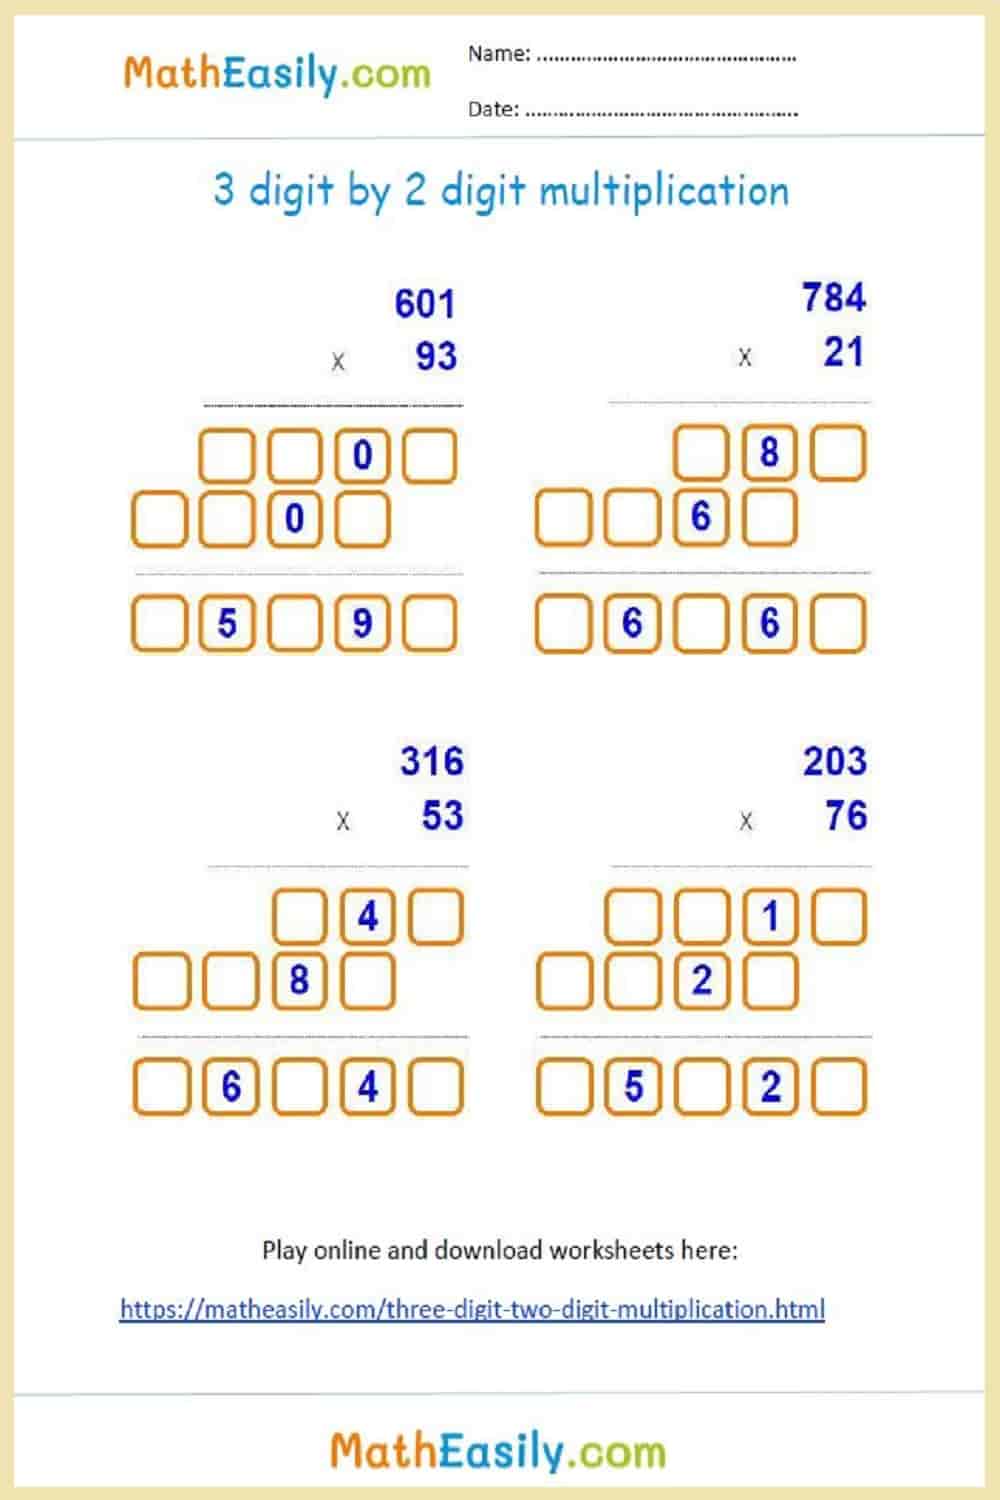  3 digit by 2 digit multiplication worksheets And Games